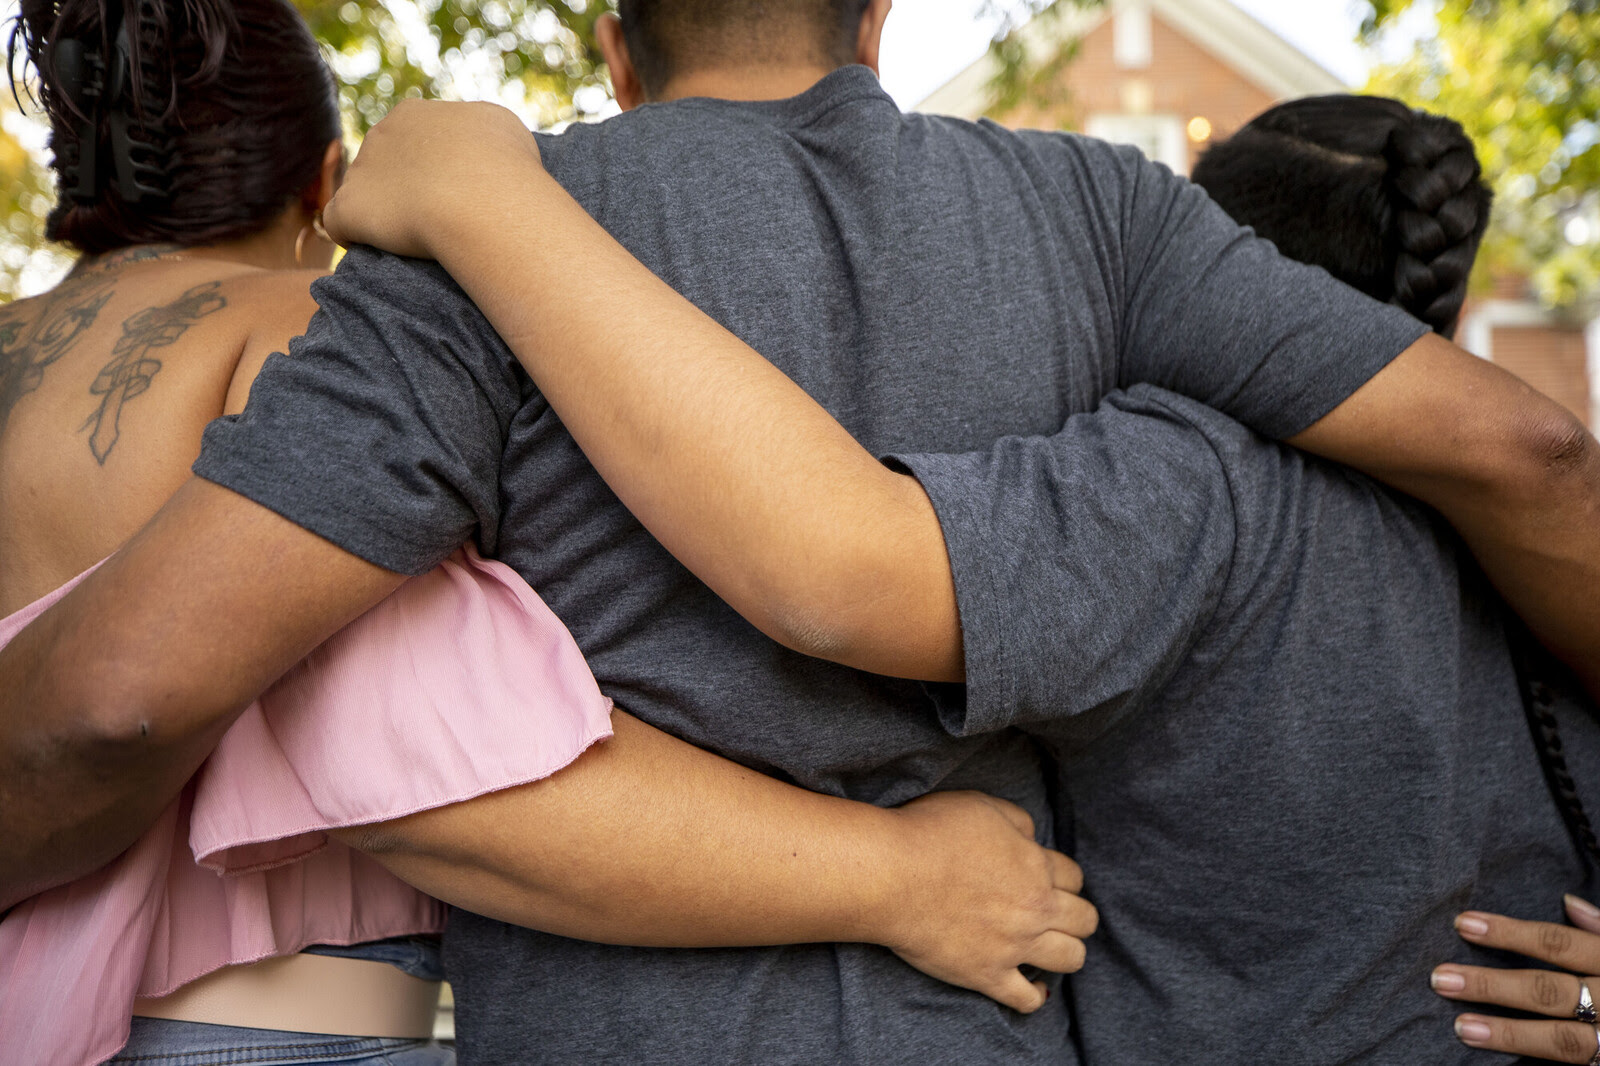 photo of a family seen from behind, standing close together with arms wrapped around one another